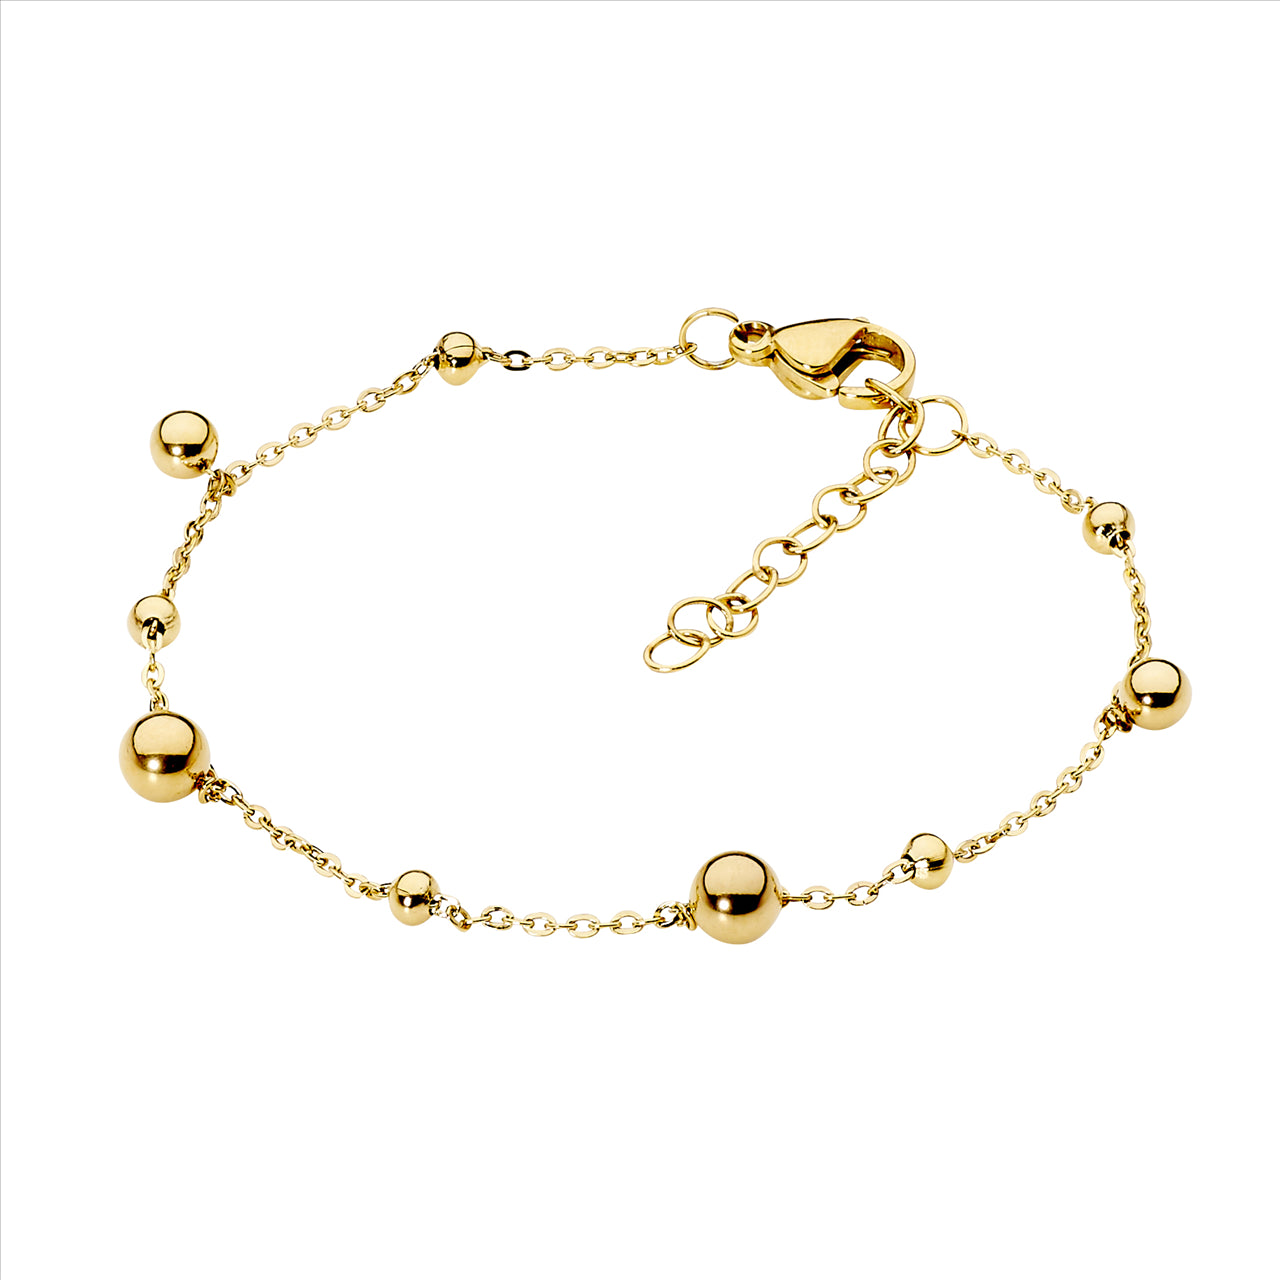 Stainless Steel, Gold Plated Ball Feature Bracelet